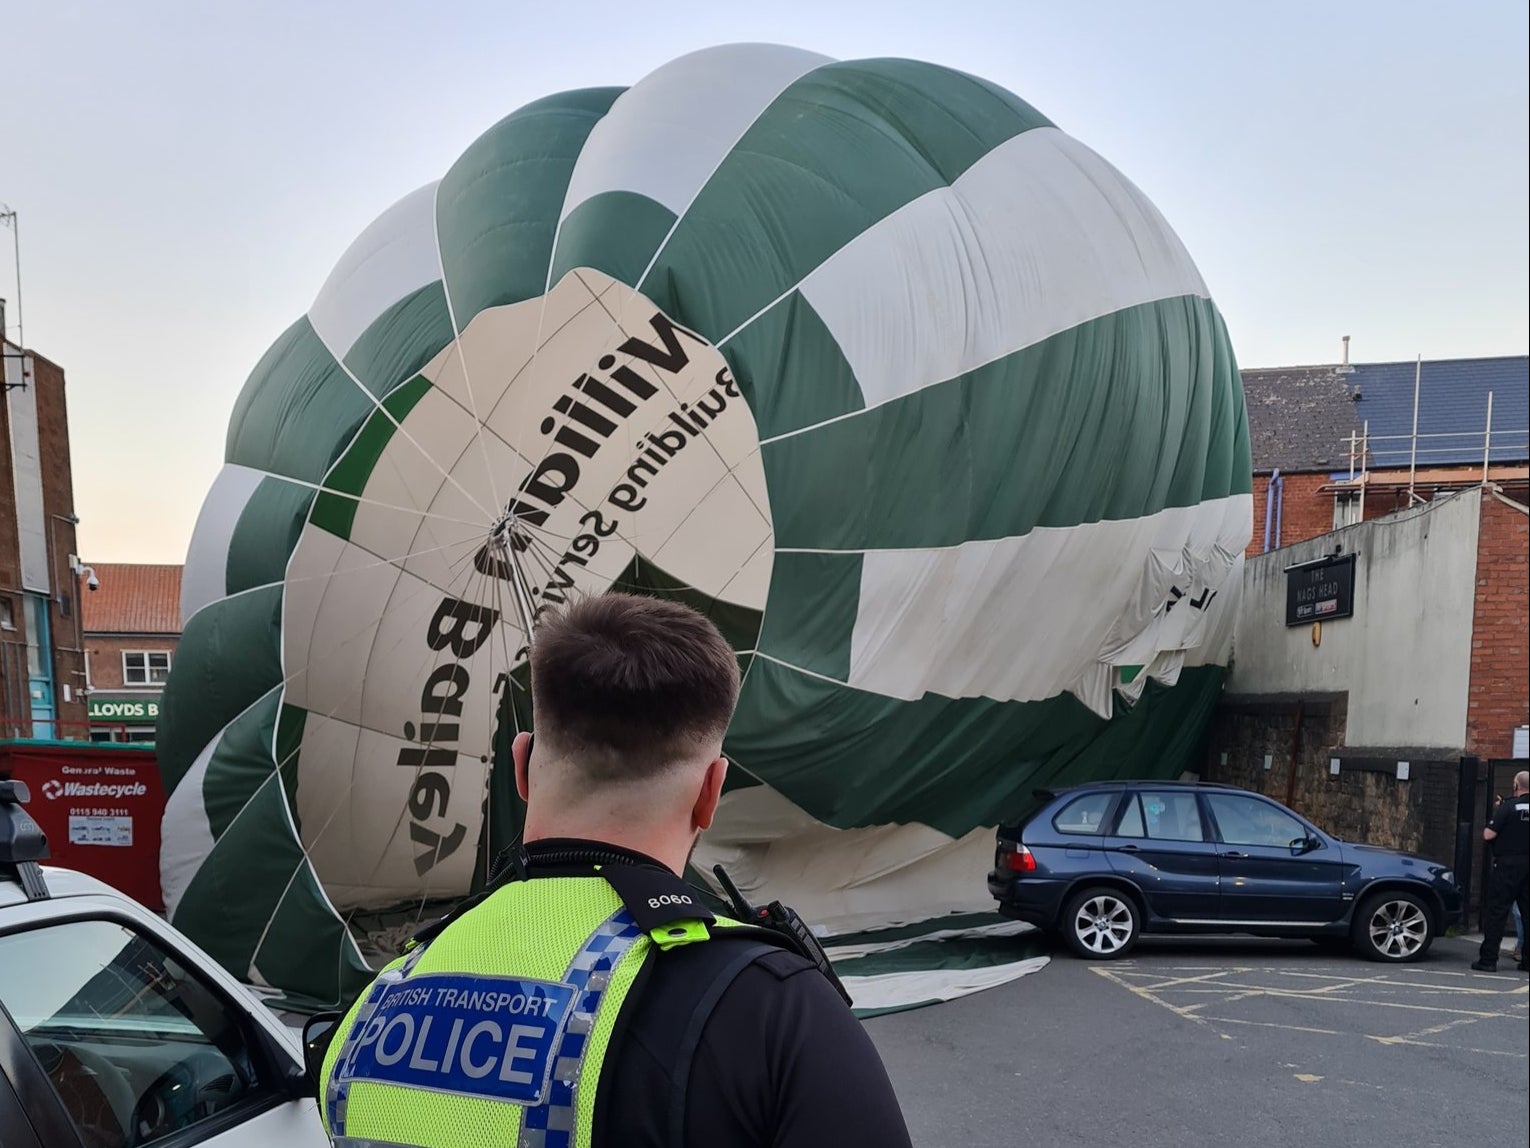 A hot air balloon crash-landed in a town centre in Nottinghamshire on Sunday